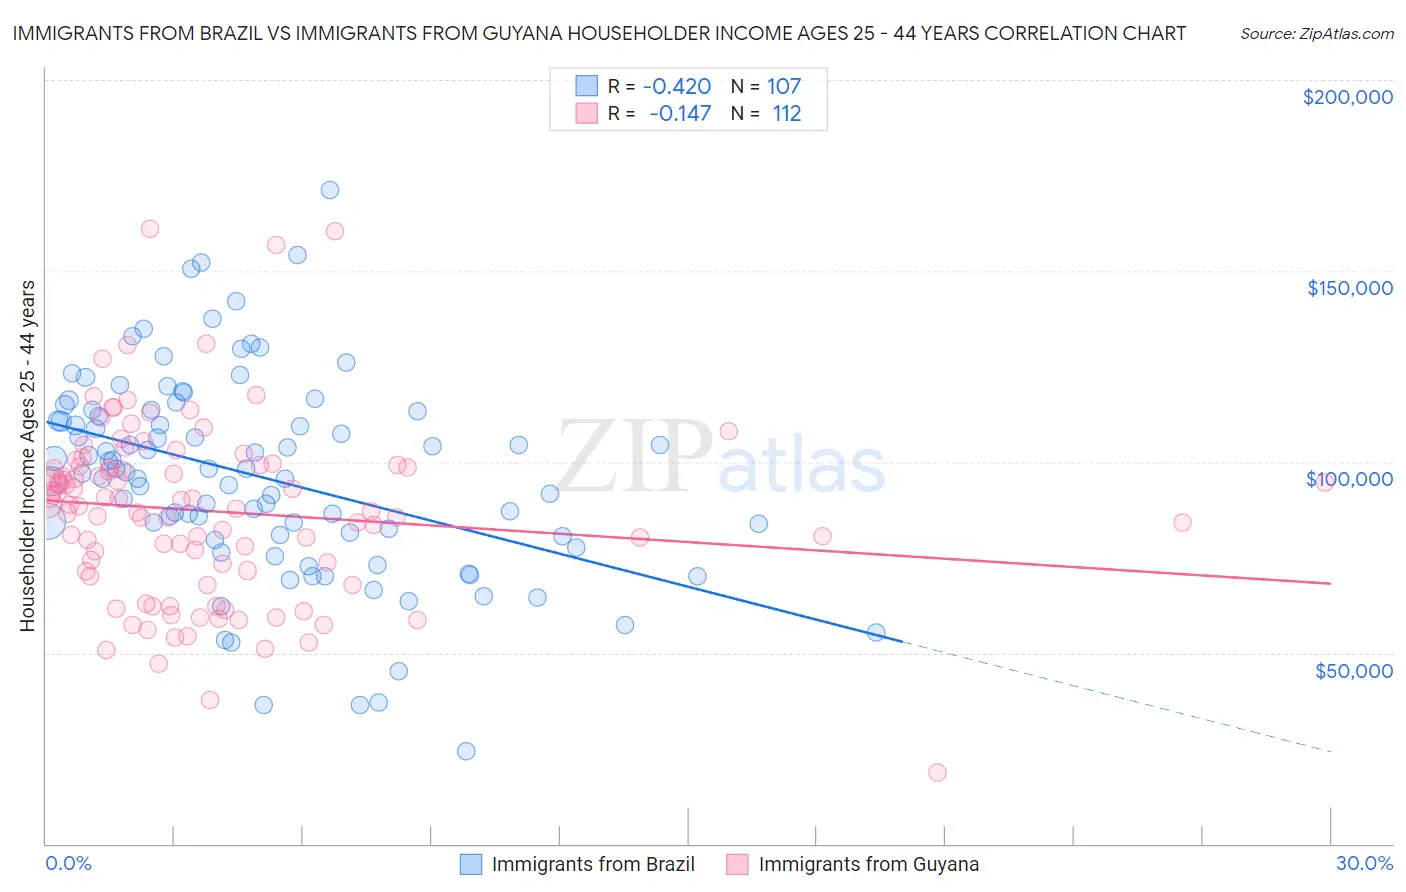 Immigrants from Brazil vs Immigrants from Guyana Householder Income Ages 25 - 44 years